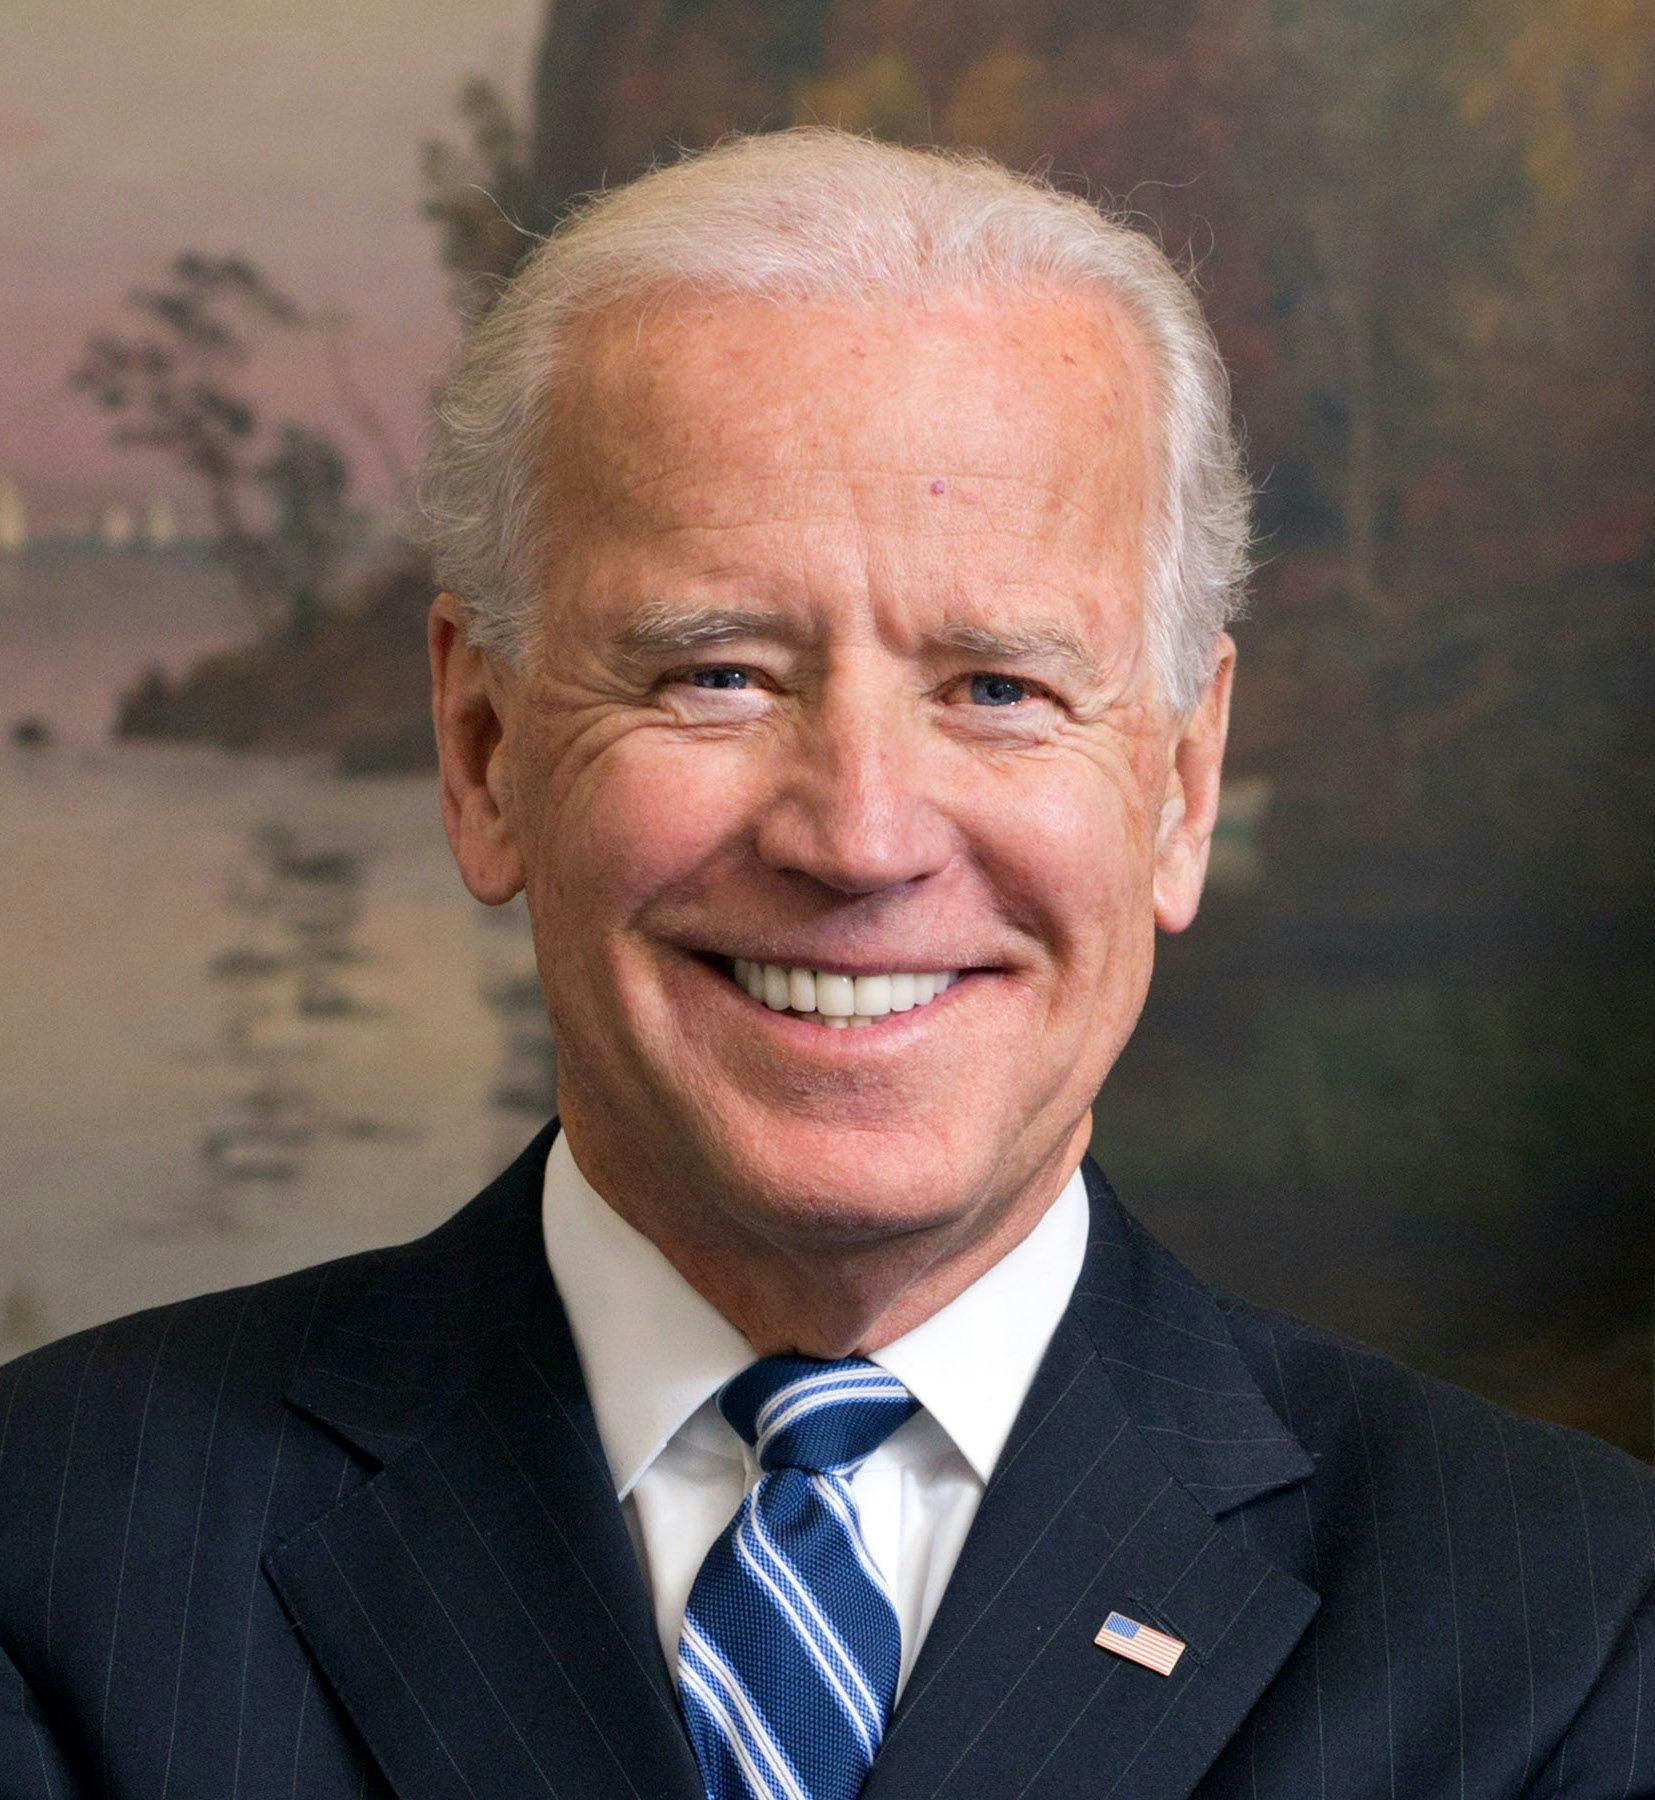 What Will the Biden Administration Mean for Healthcare?